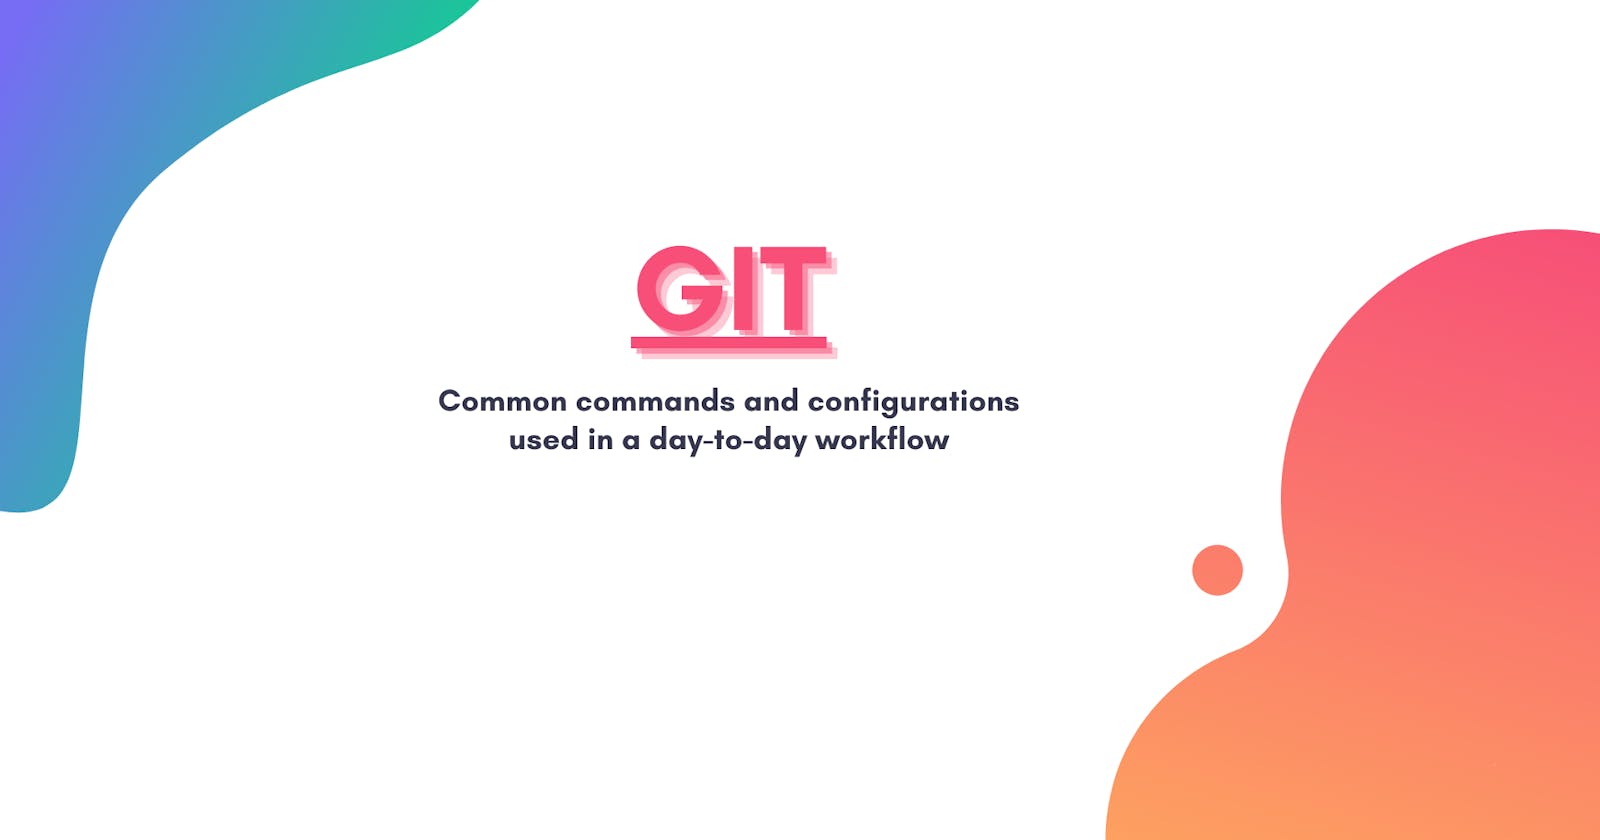 Common Git commands and configurations used in a day-to-day workflow